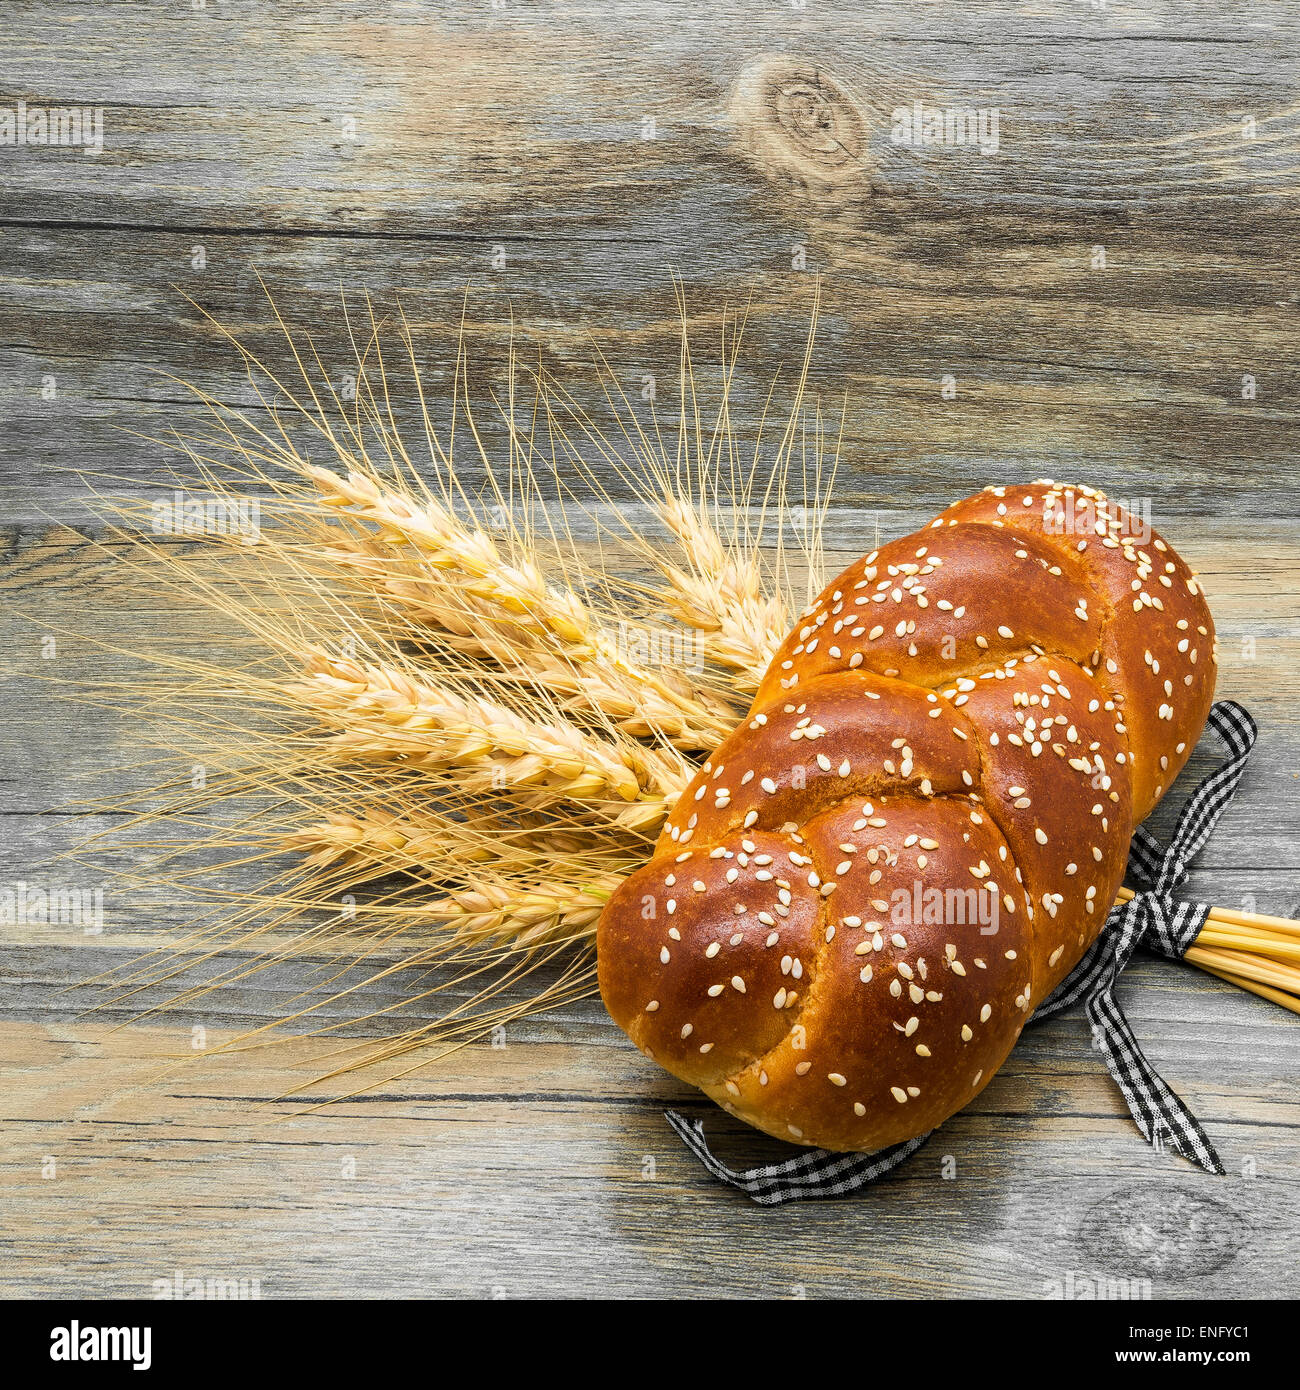 Bun with sesame seeds and ears on wooden  background. Stock Photo